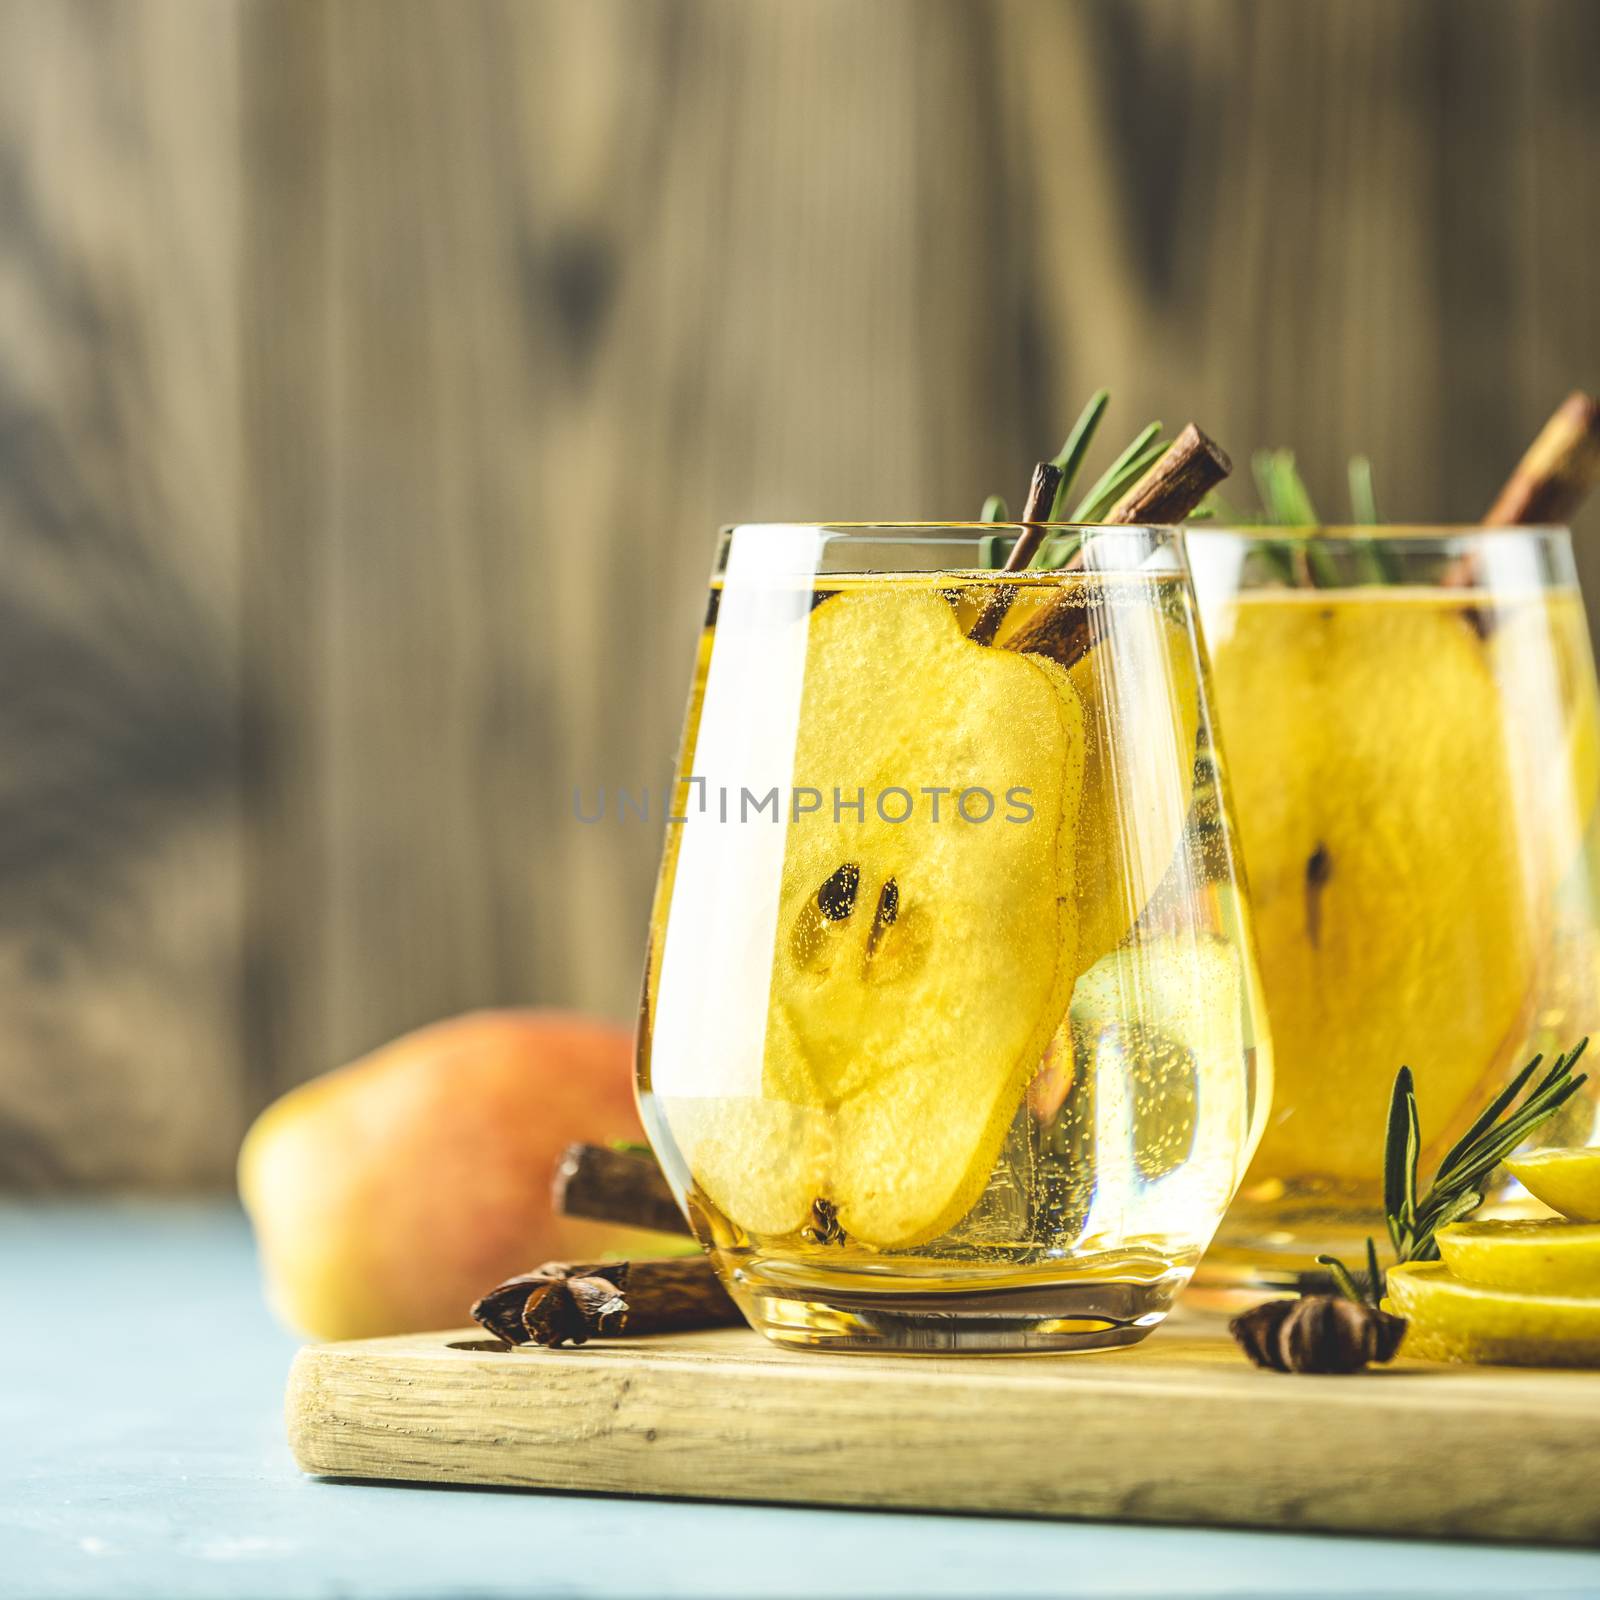 Festive summer drinks, pear spice cocktail. Hot drink cocktail for Christmas, winter or autumn holidays. Served with ingredients on light blue surface.